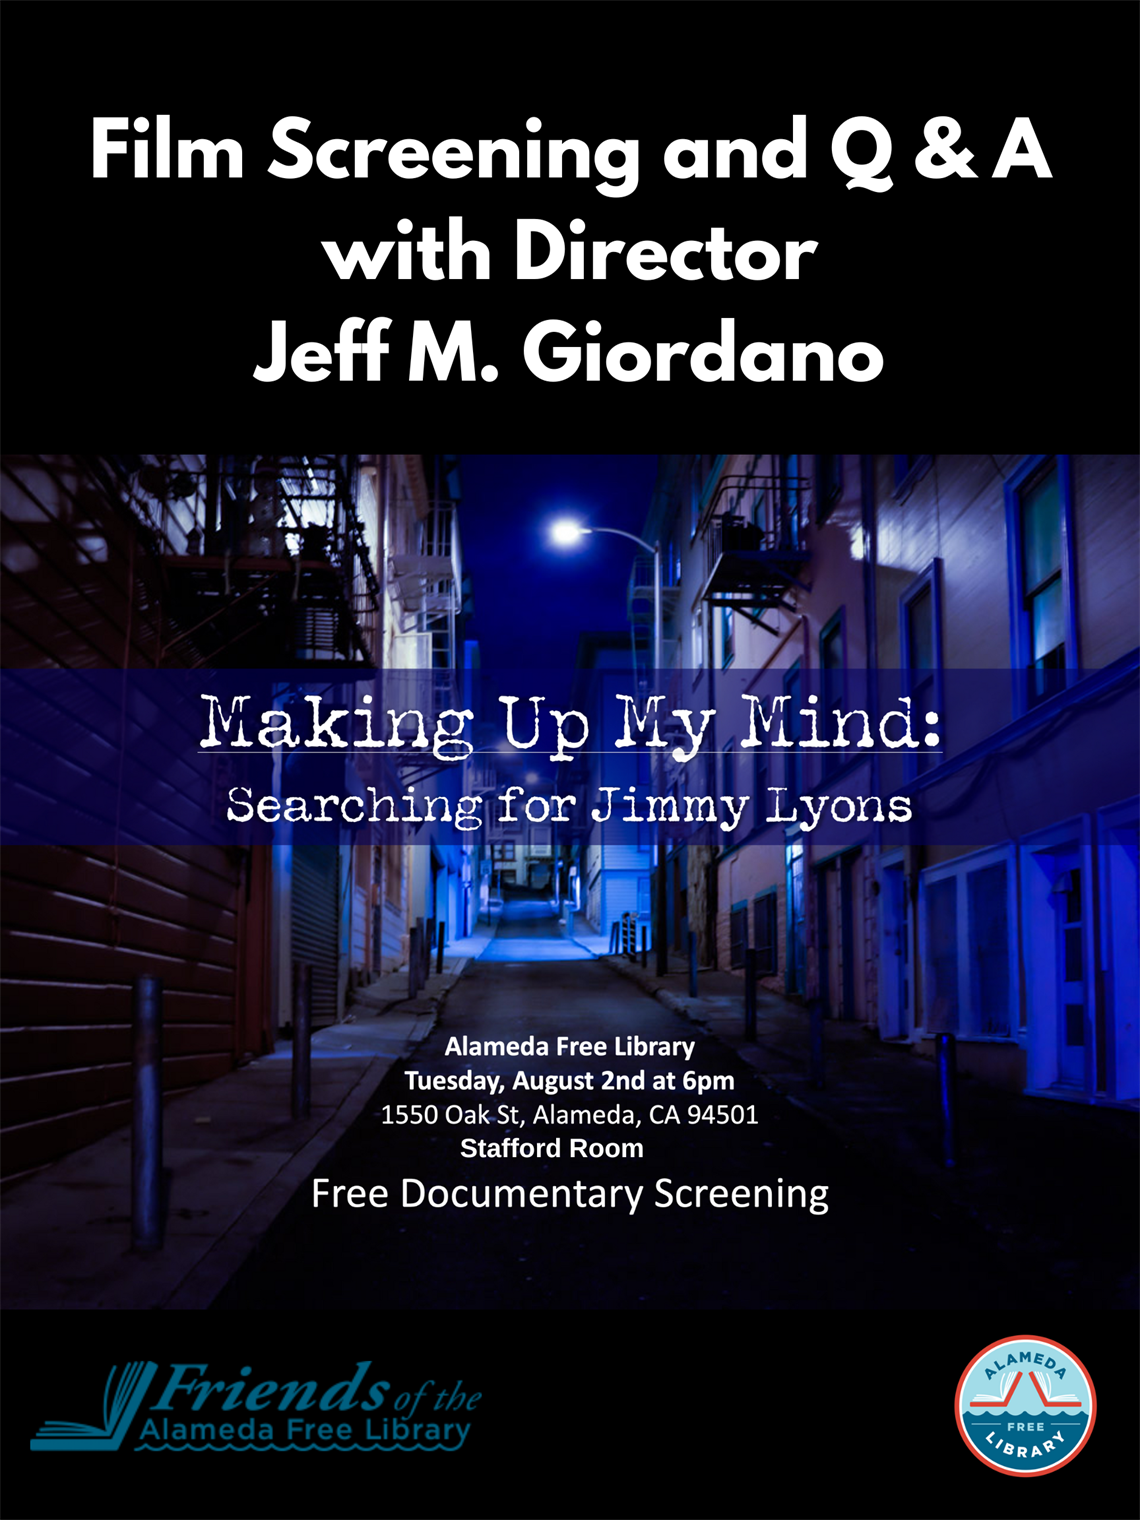 Jeff Giordano - Film Screening and Q & A.png